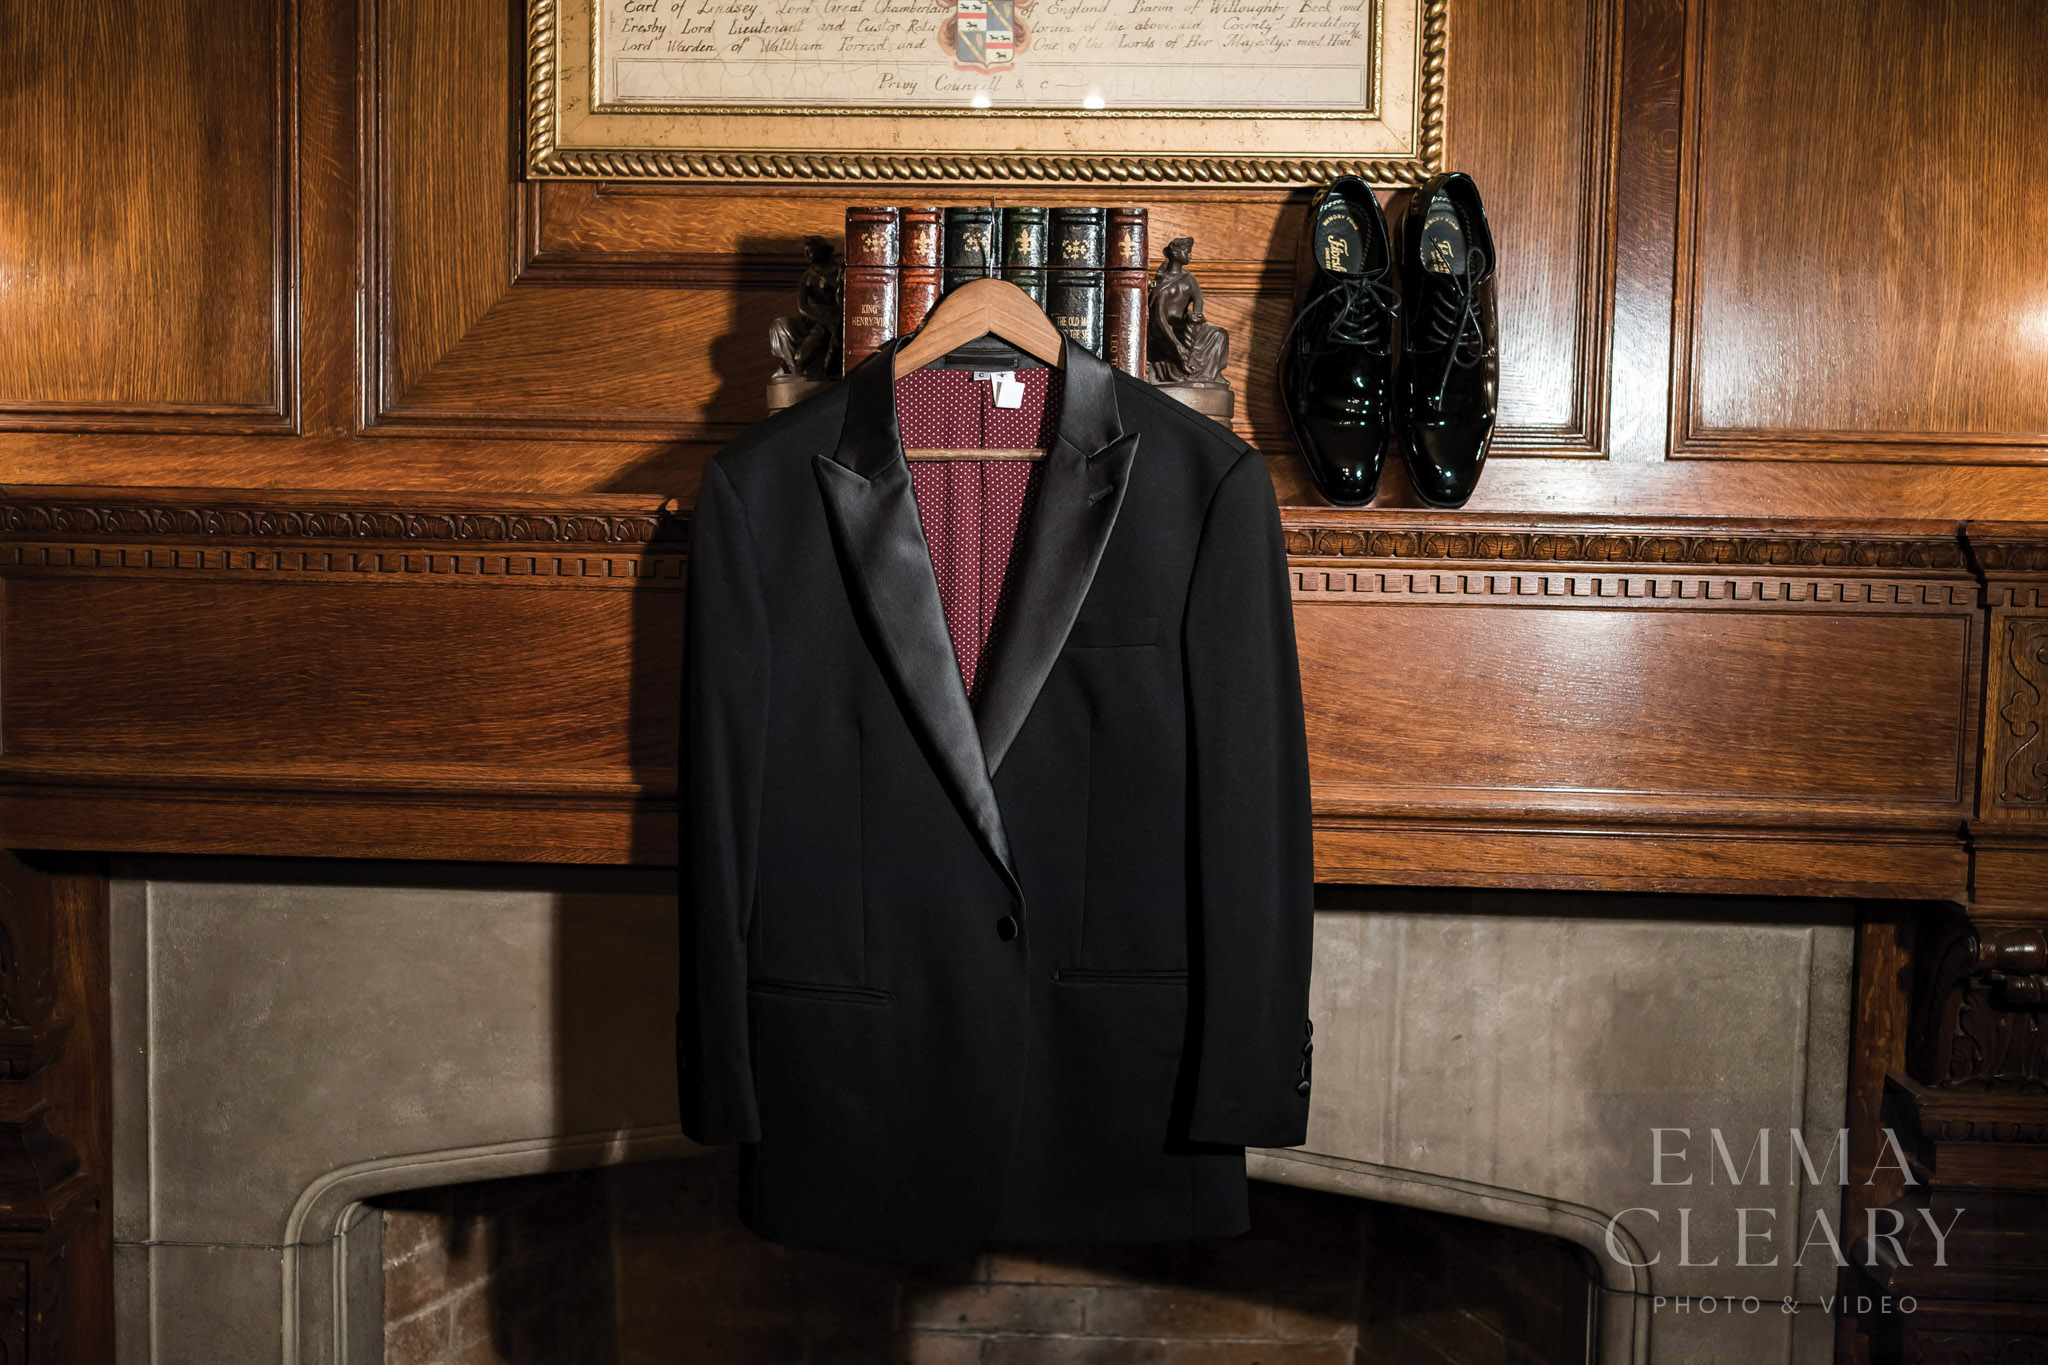 The groom's suit and shoes